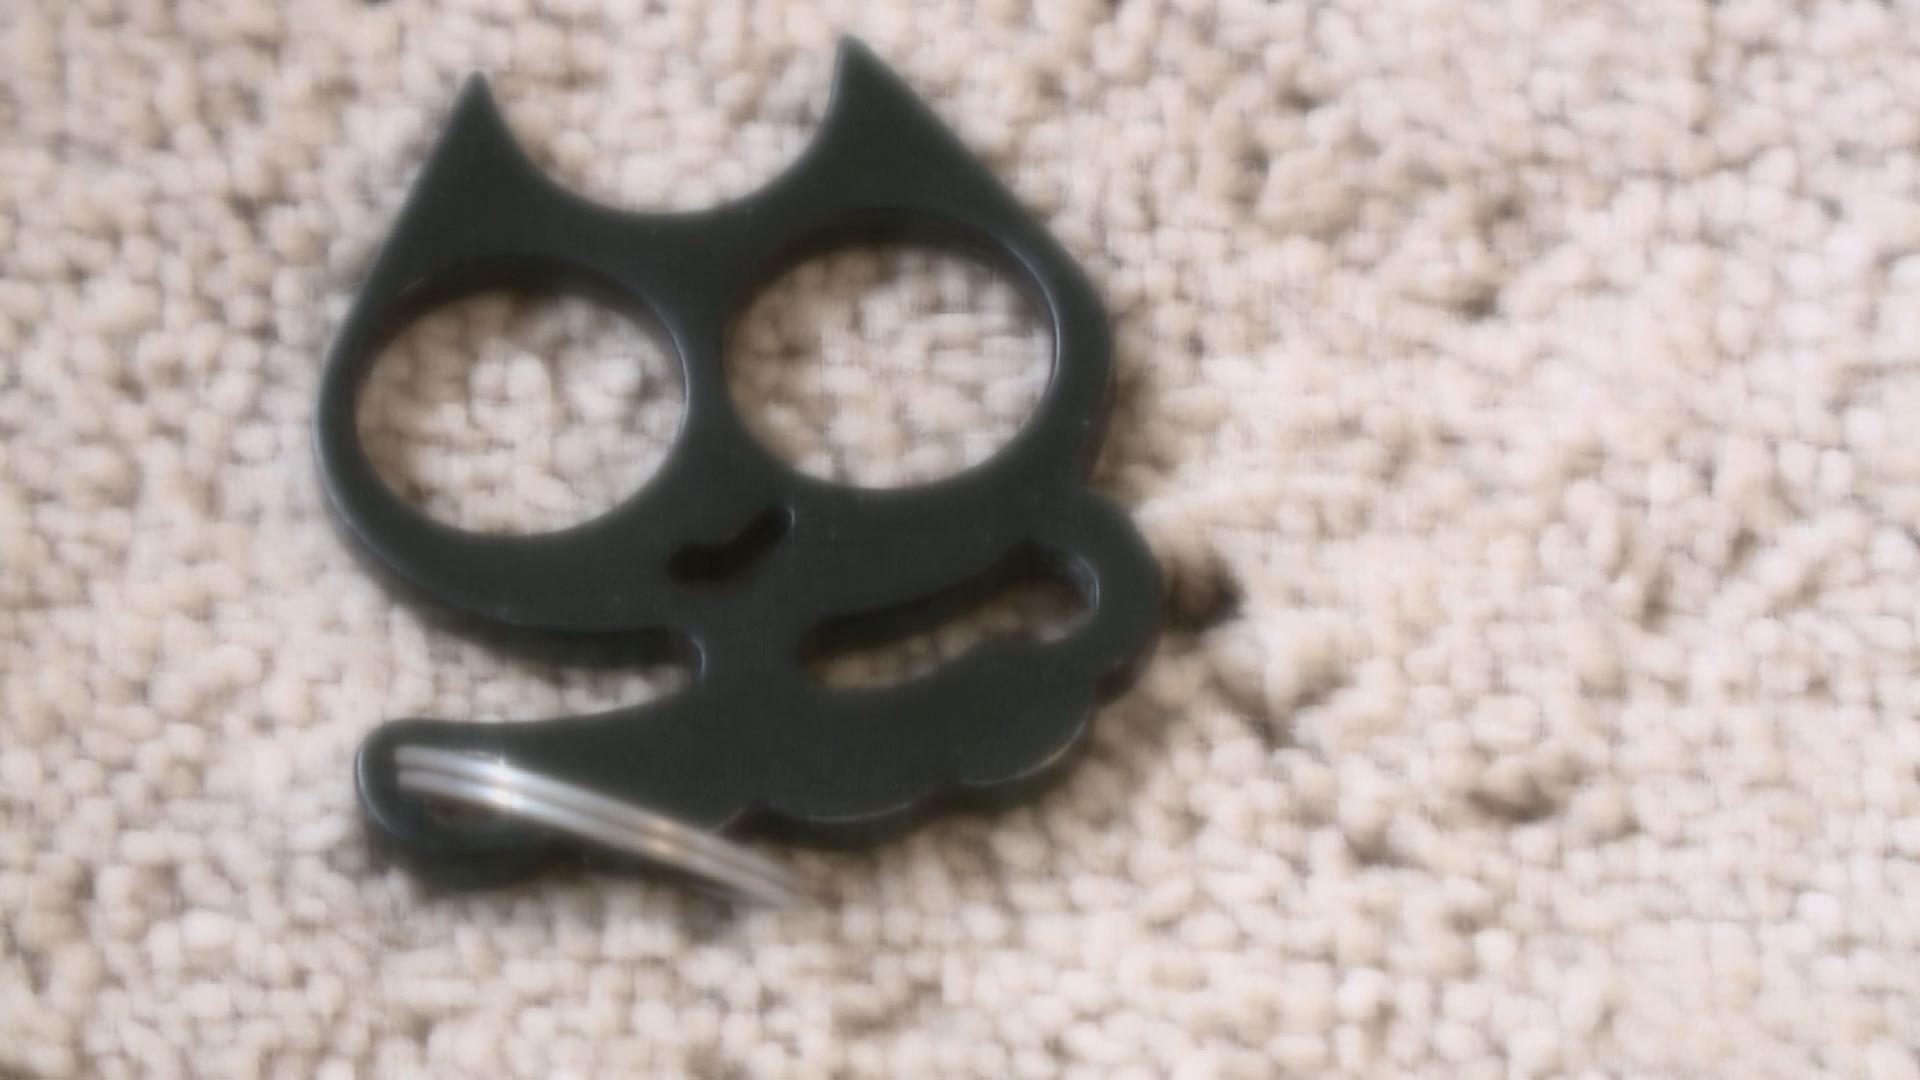 Popular keychains could land you in jail | thv11.com